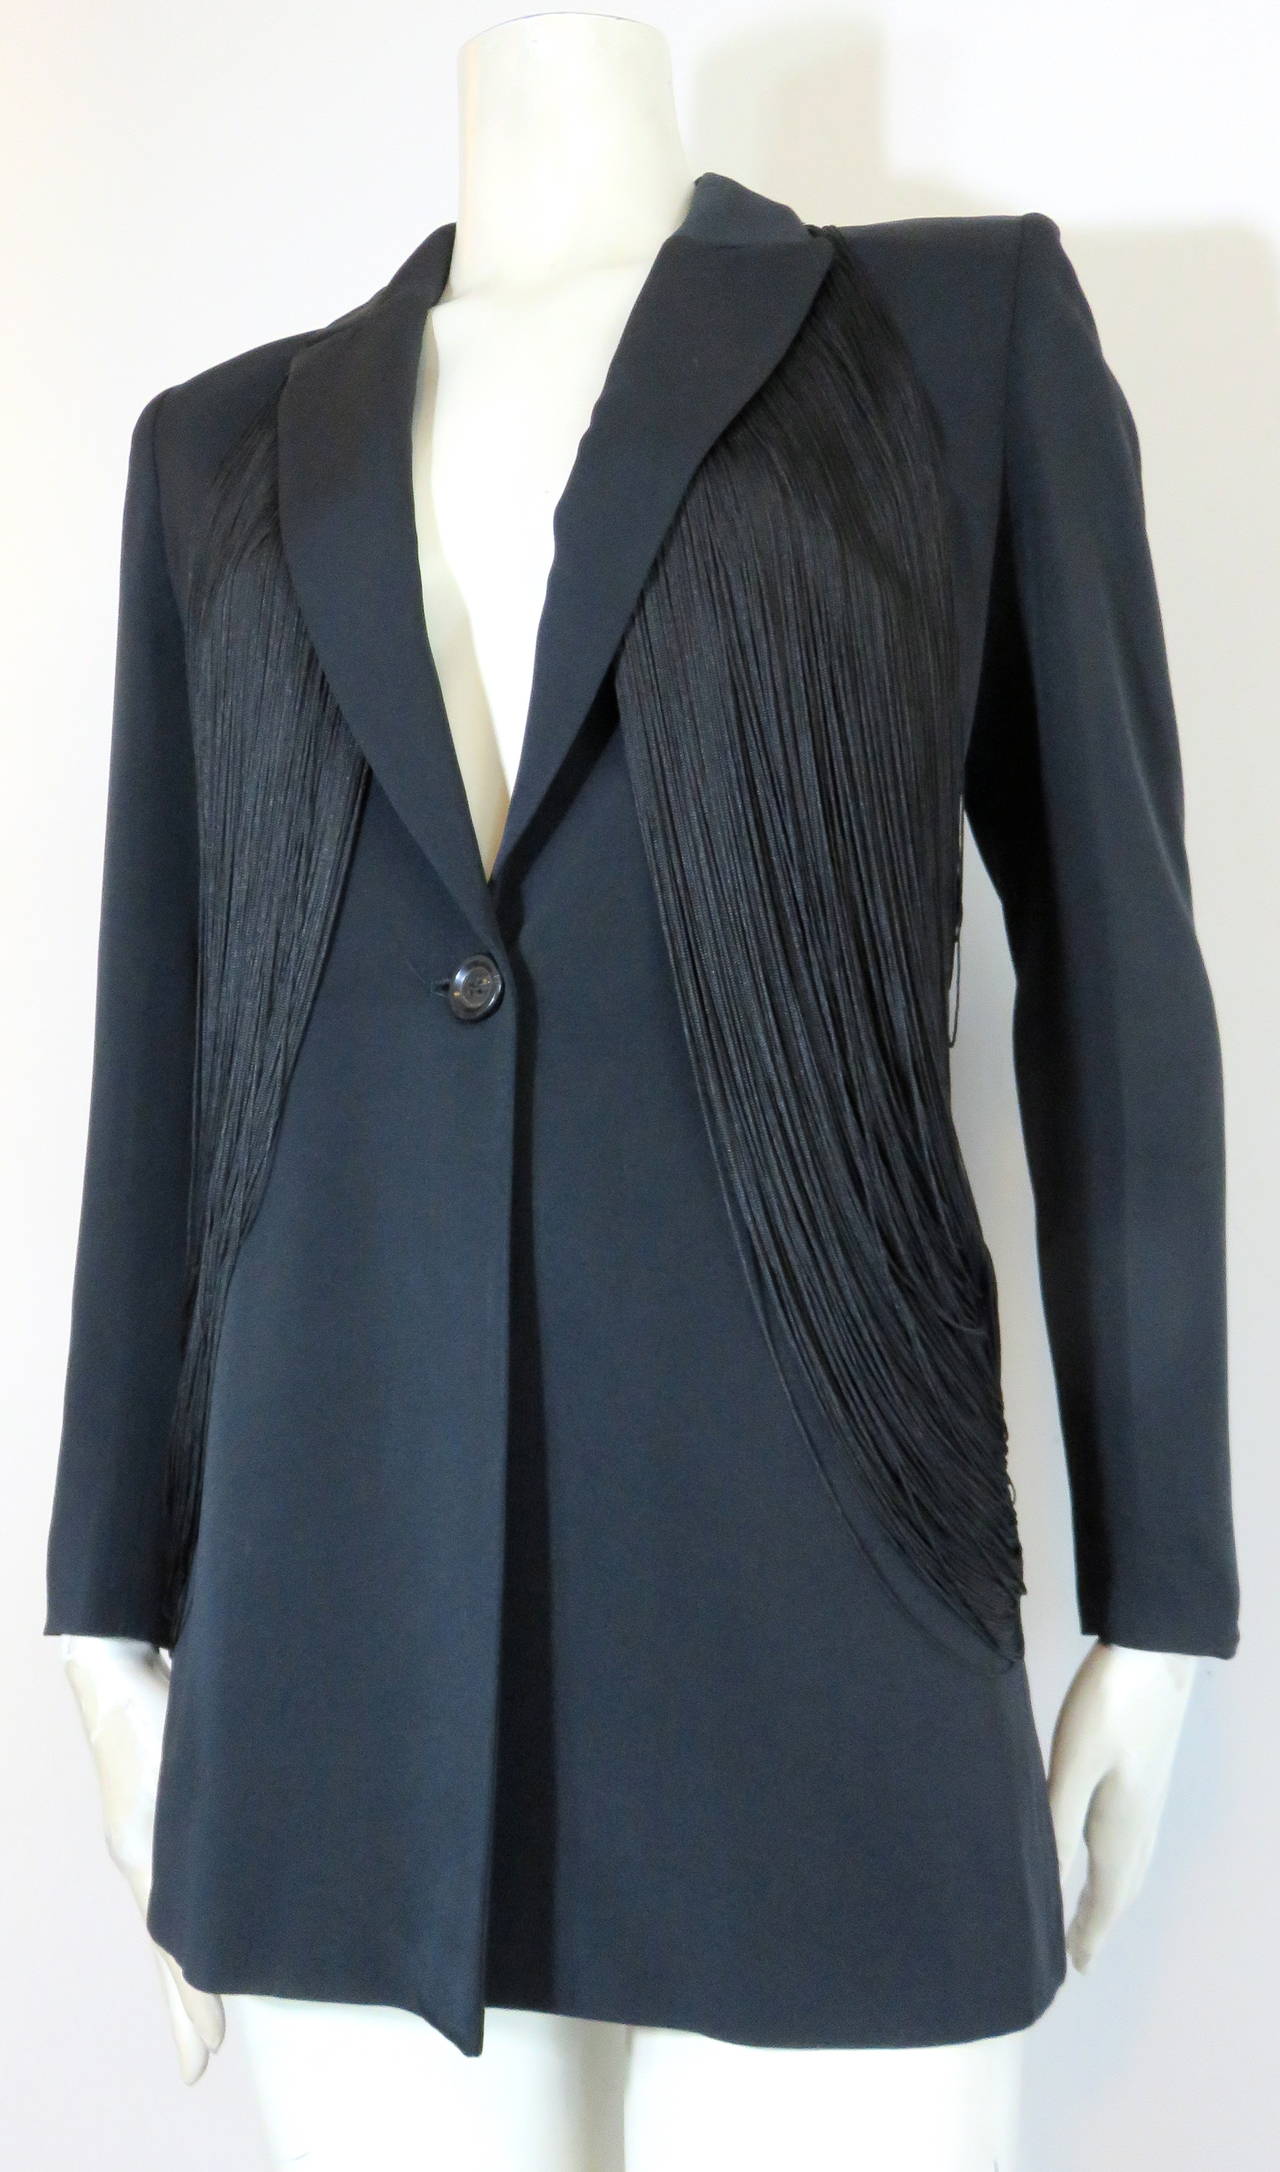 Excellent condition, RIFAT OZBEK Black fringe jacket.

This wonderfully tailored jacket features dramatic, draped, fringe detailing at front to back on both sides.

Sharp, constructed shoulder shape.

Single button front opening.

Fully